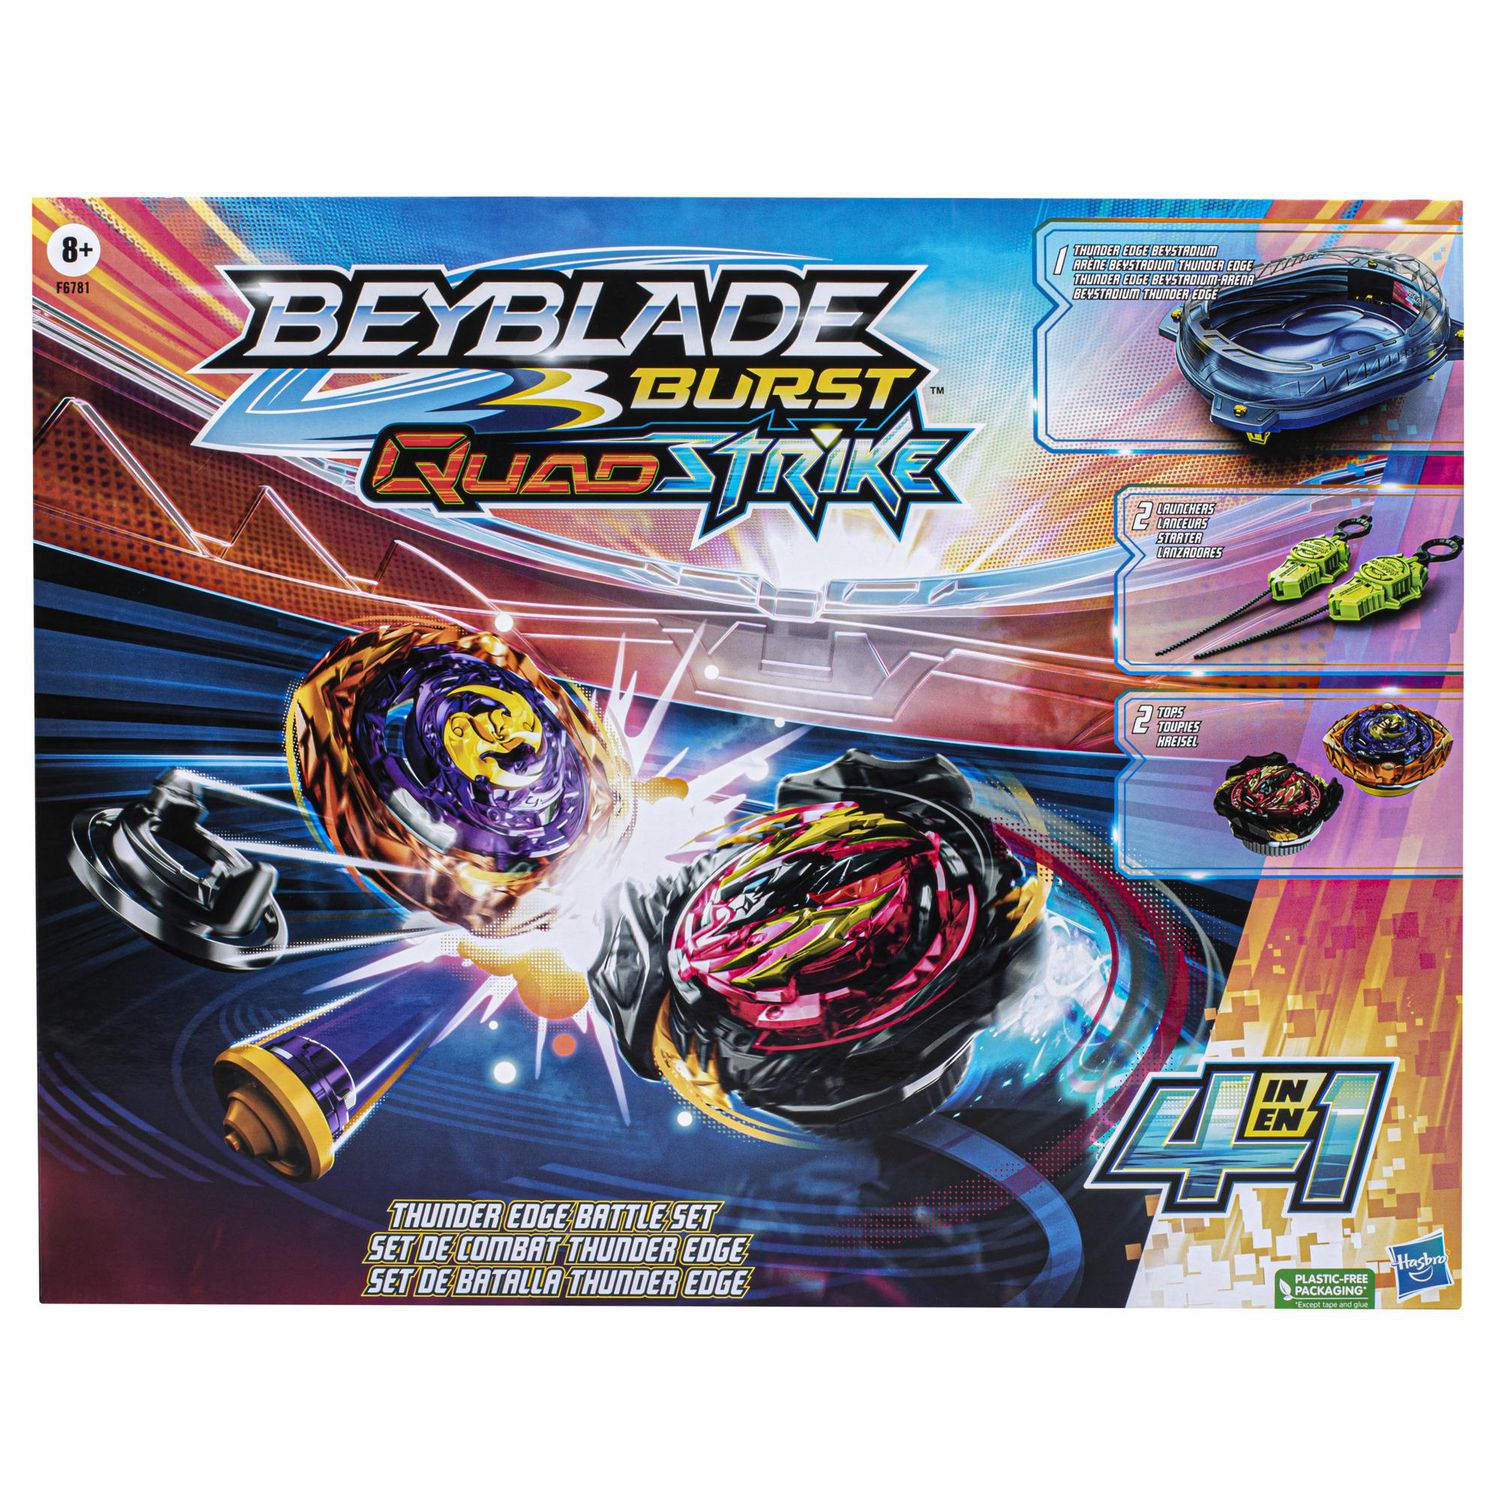 Beyblade Burst QuadStrike Thunder Edge Battle Set, Battle Game Set with  Beystadium, 2 Spinning Top Toys, and 2 Launchers for Ages 8 and Up, Ages 8  and